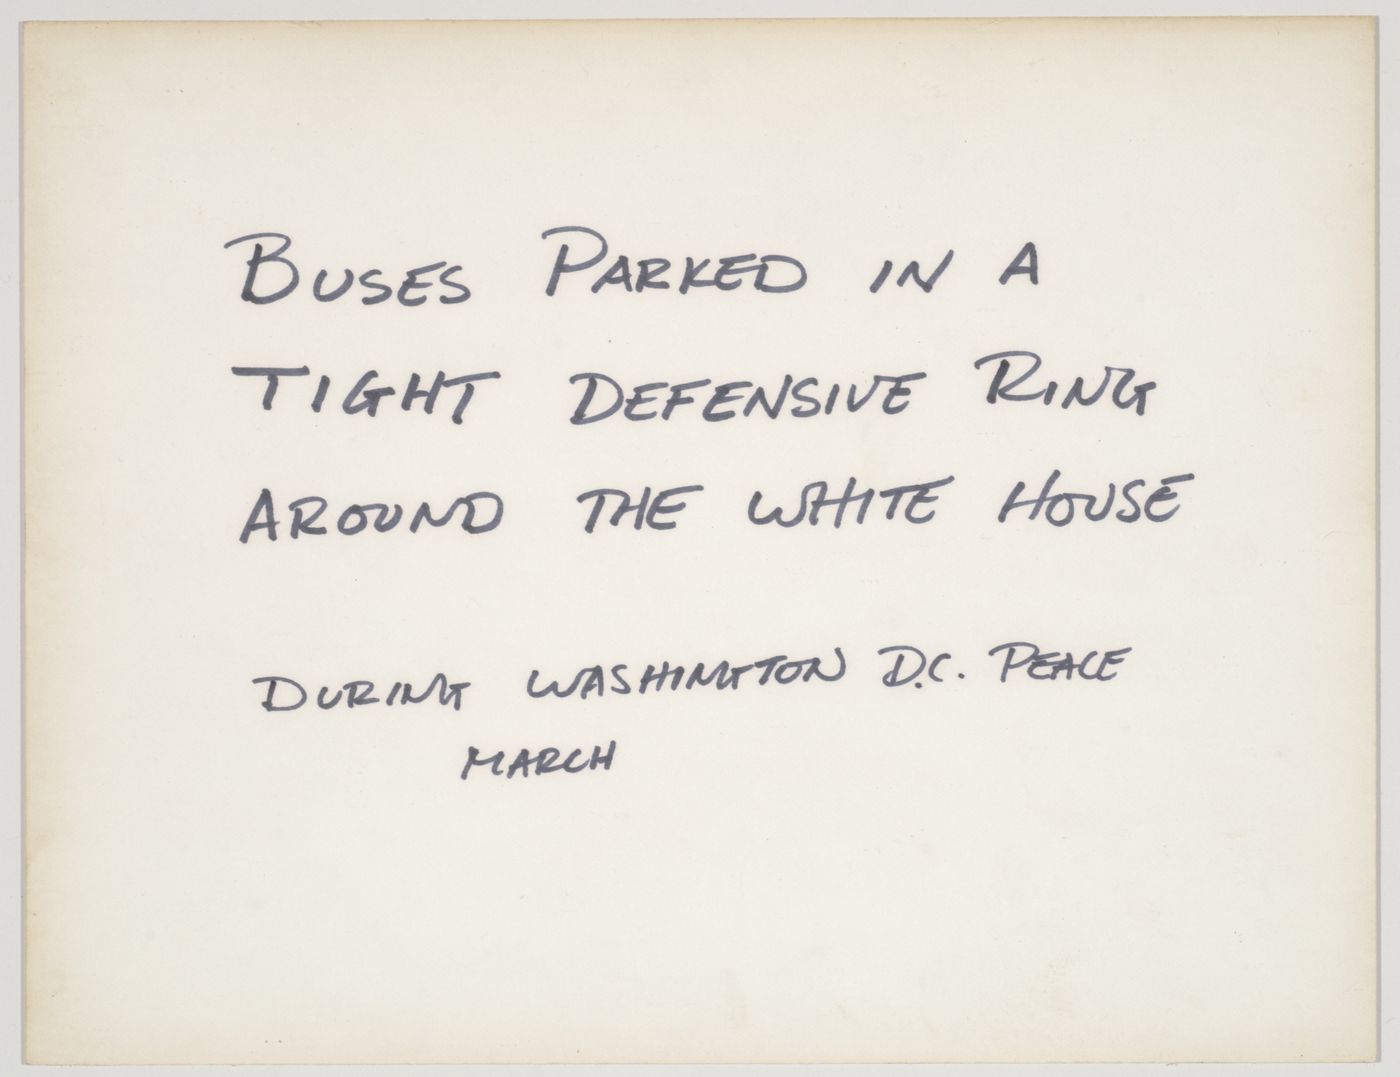 Buses parked in a tight defensive ring around the White House during Washington D.C. Peace March